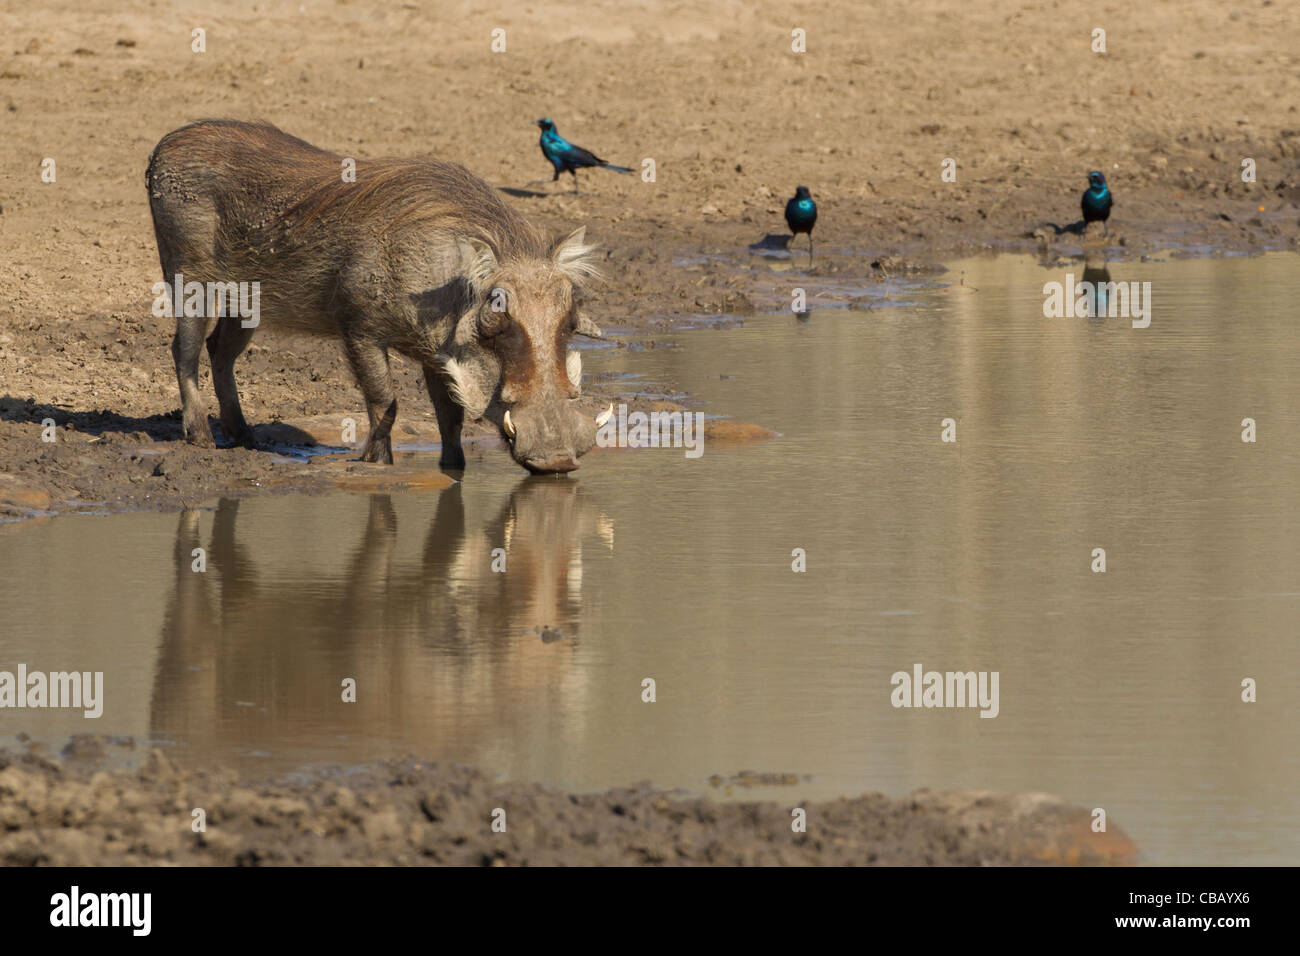 A Warthog drinking with some starlings in Background. Stock Photo